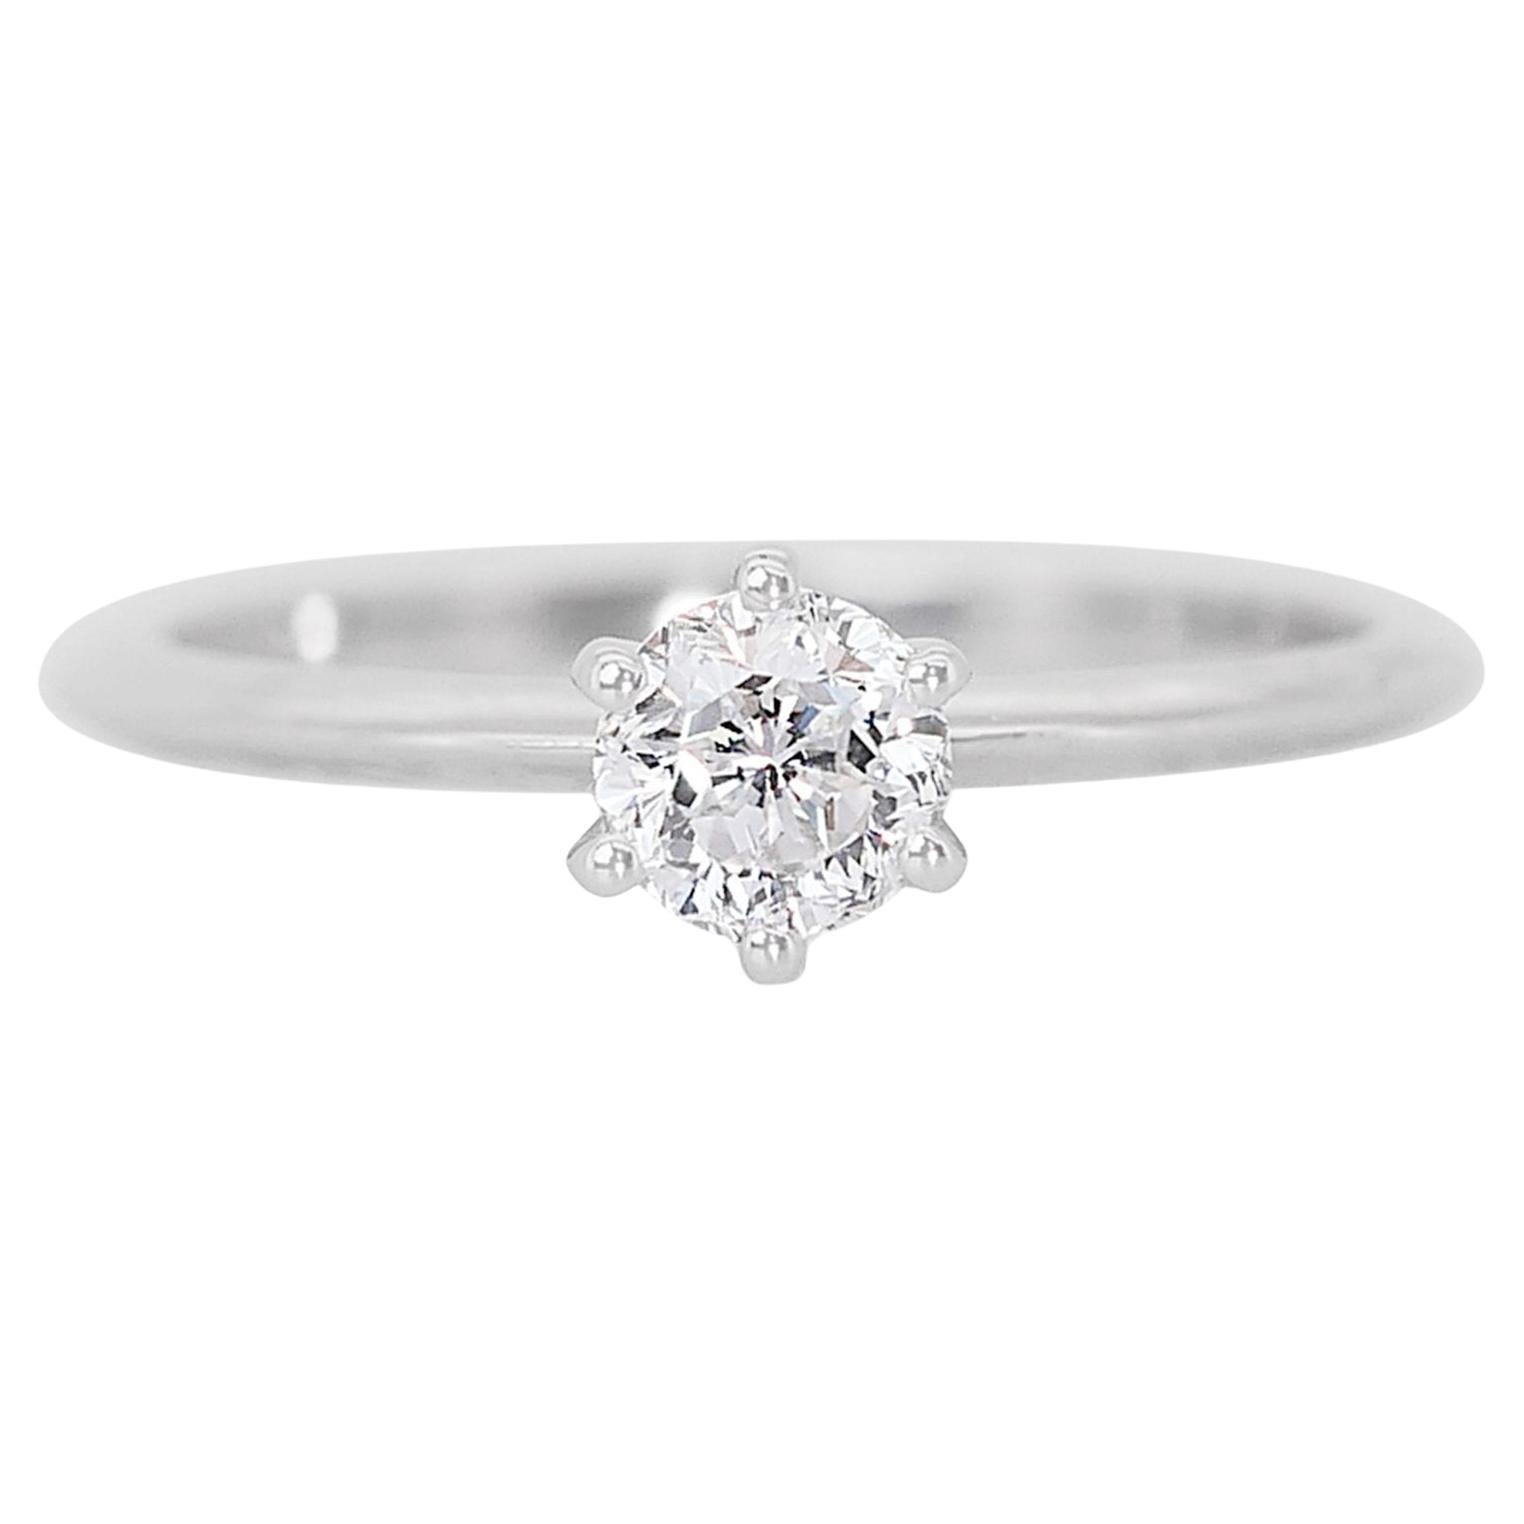 Exquisite 0.70ct Round Diamond Solitaire Ring in 18k White Gold - GIA Certified For Sale